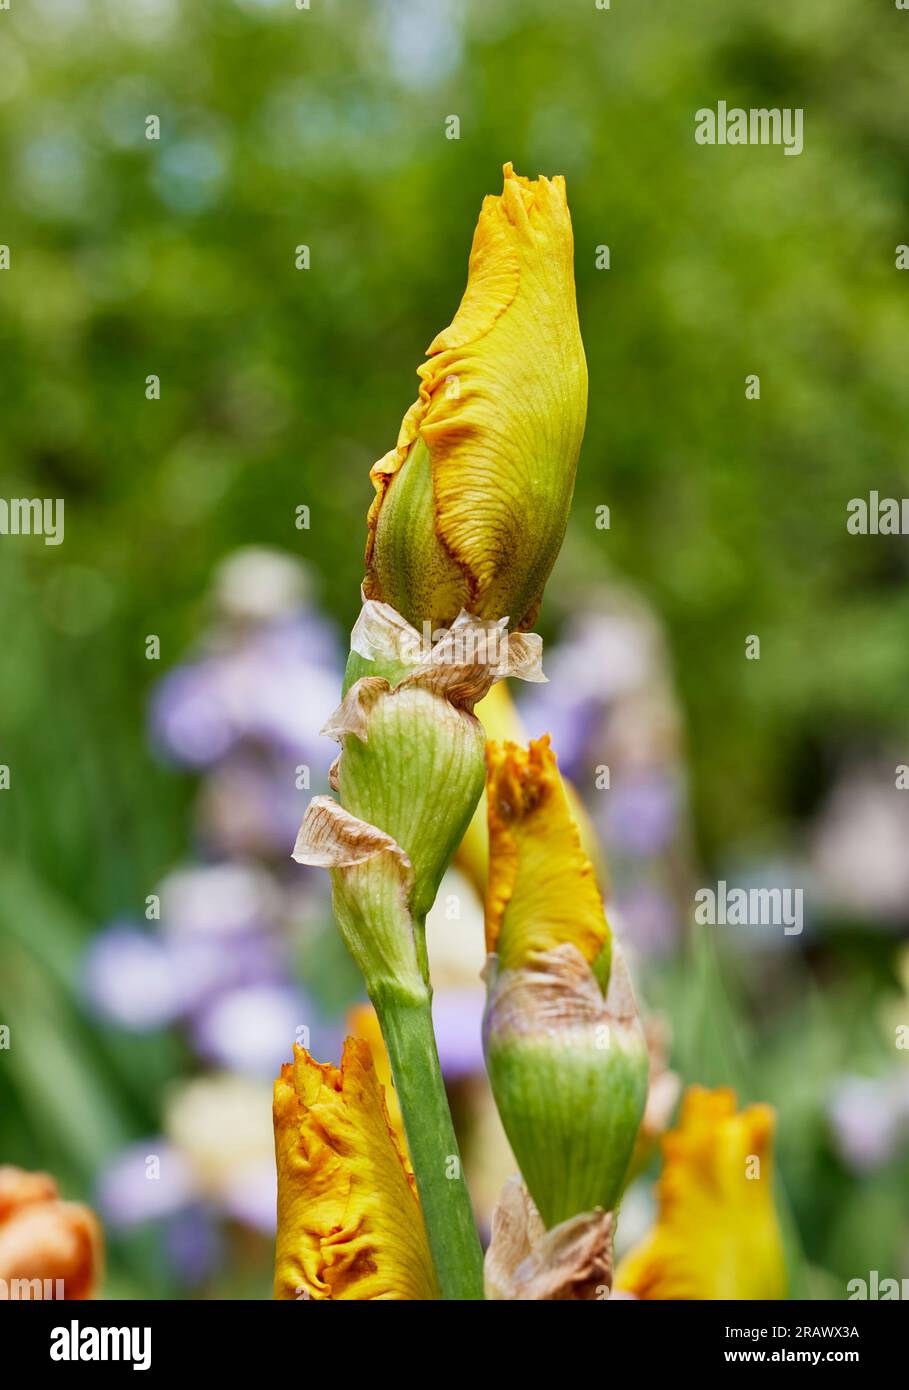 Close up of a Calizona Gold Iris Flower Bud with Shallow depth of Field Stock Photo